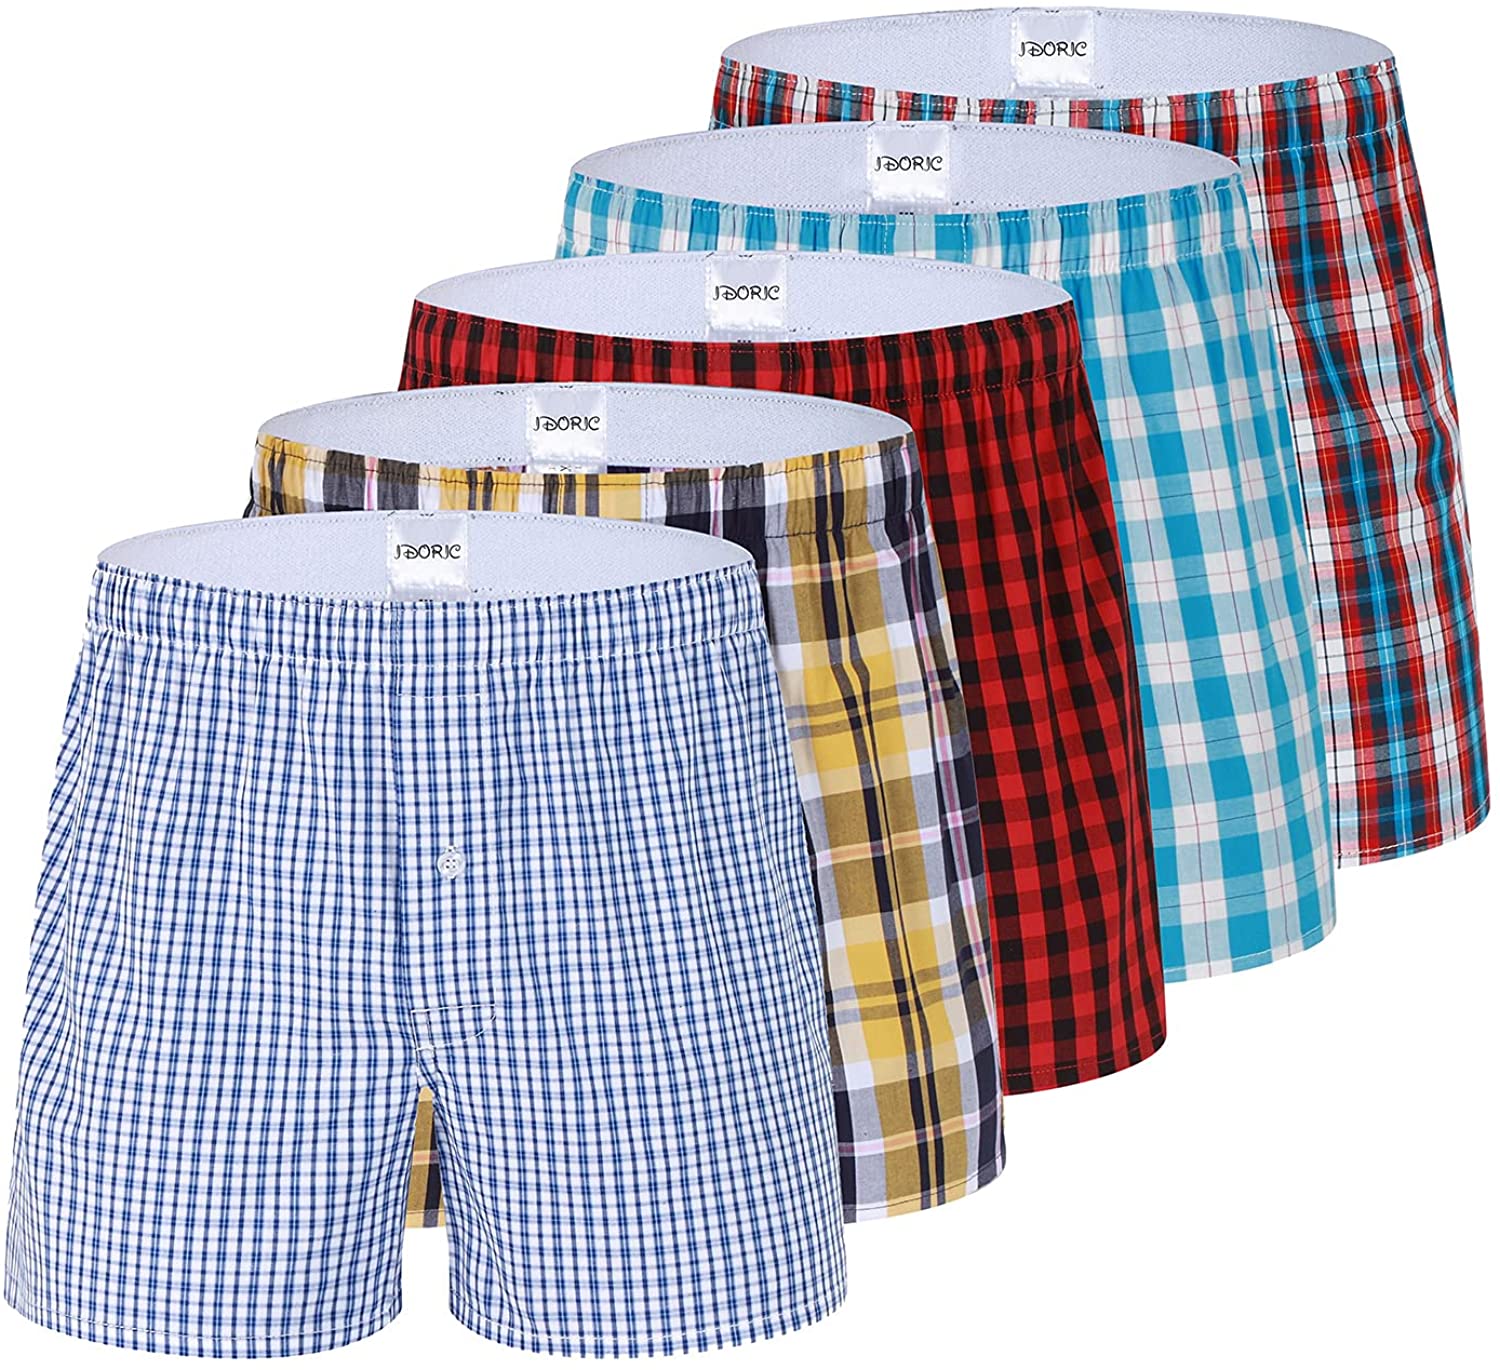 Lower East Mens Boxer Shorts Pack of 3